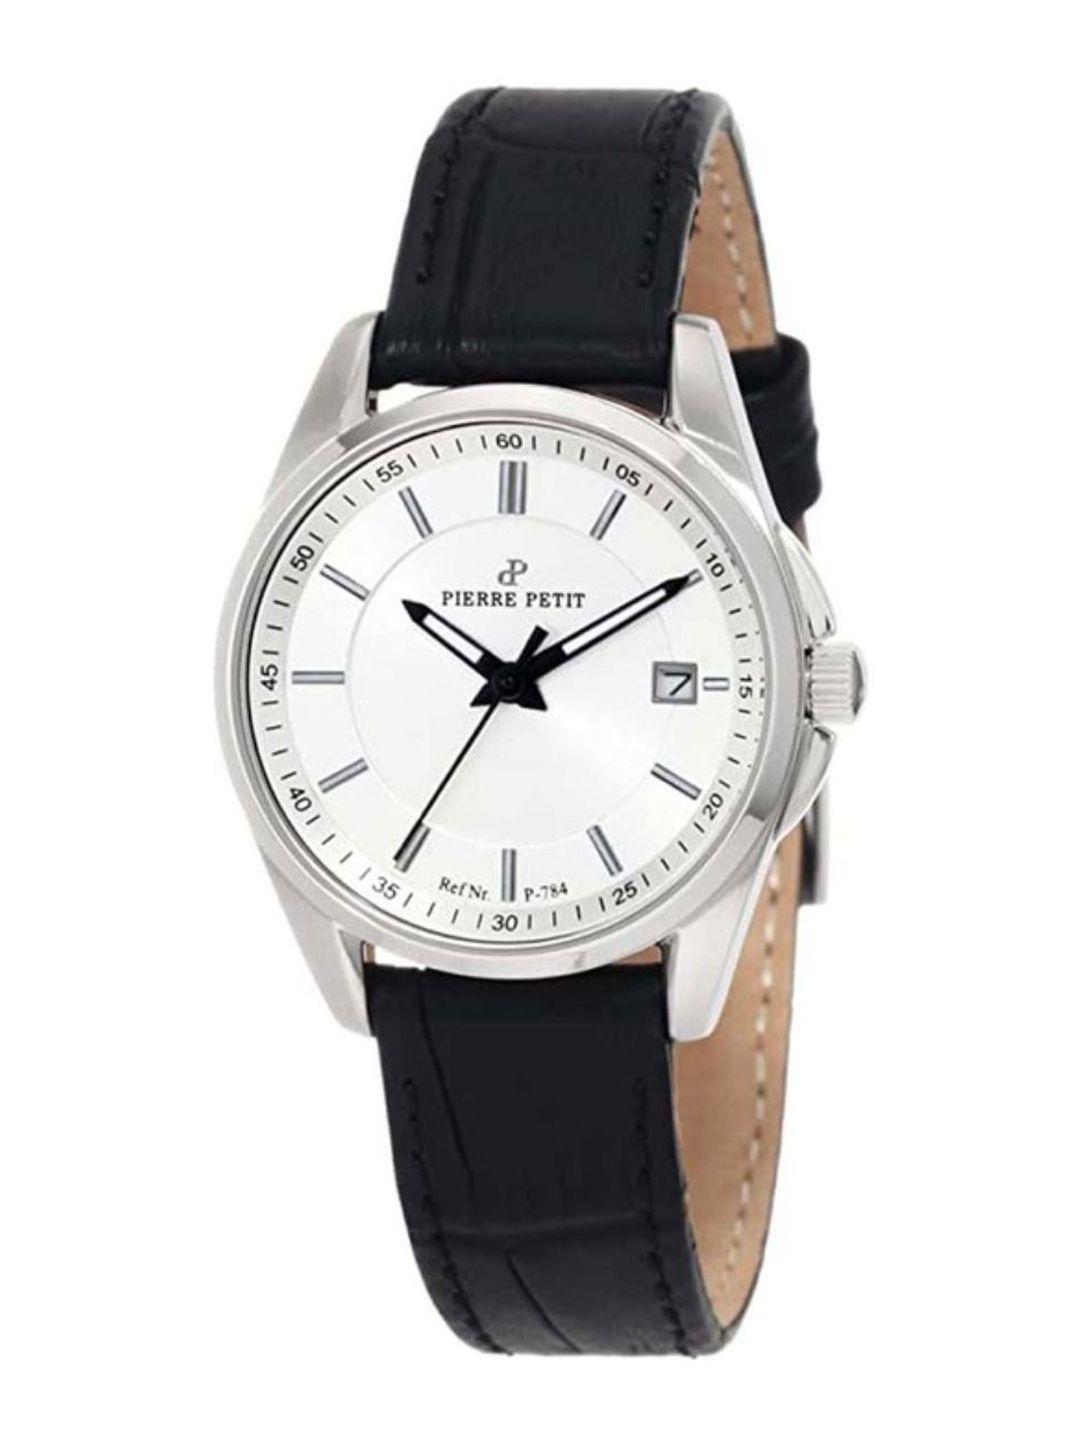 jacques-lemans-men-embellished-leather-wrap-around-straps-digital-watch-p784a